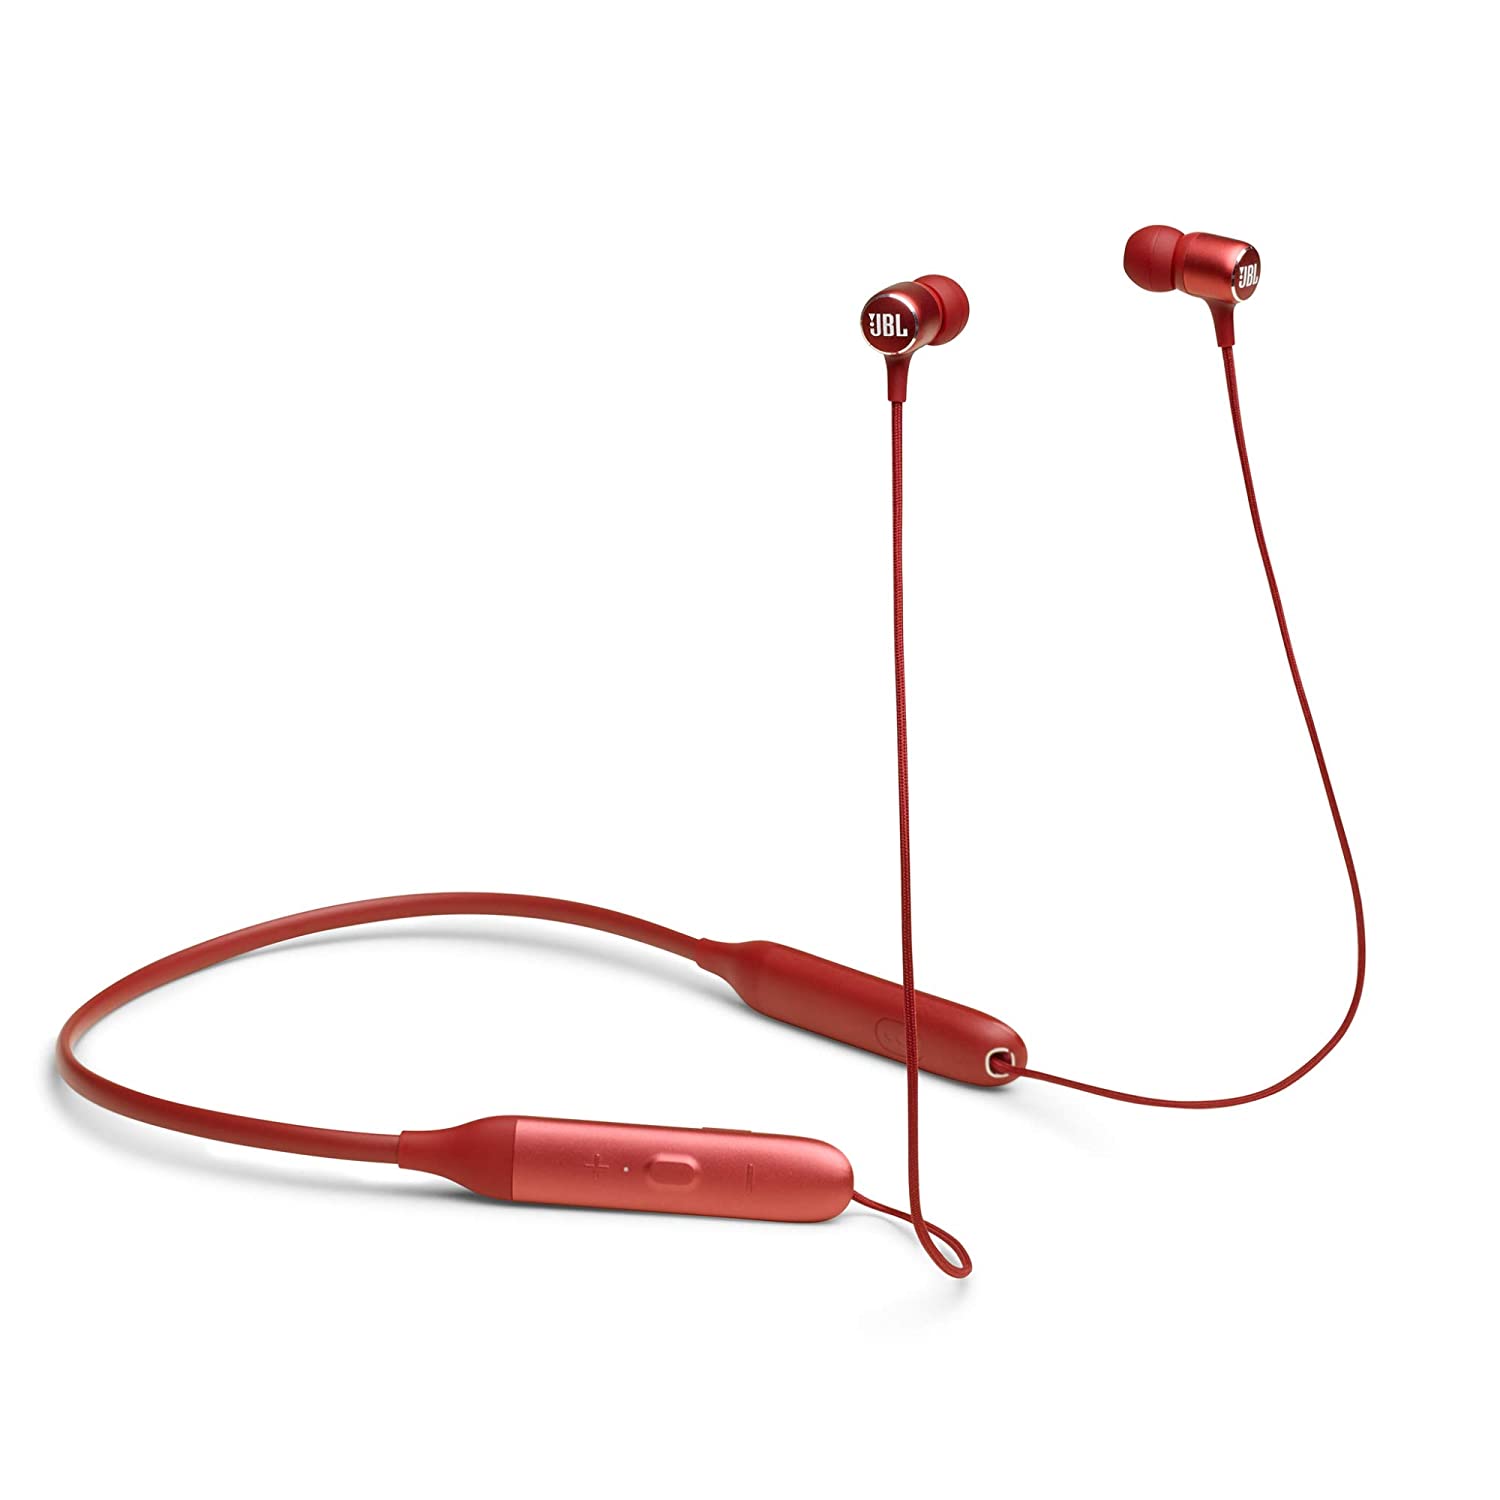 JBL LIVE220BT by Harman Wireless Bluetooth in Ear Neckband Headphones with Mic (Red)